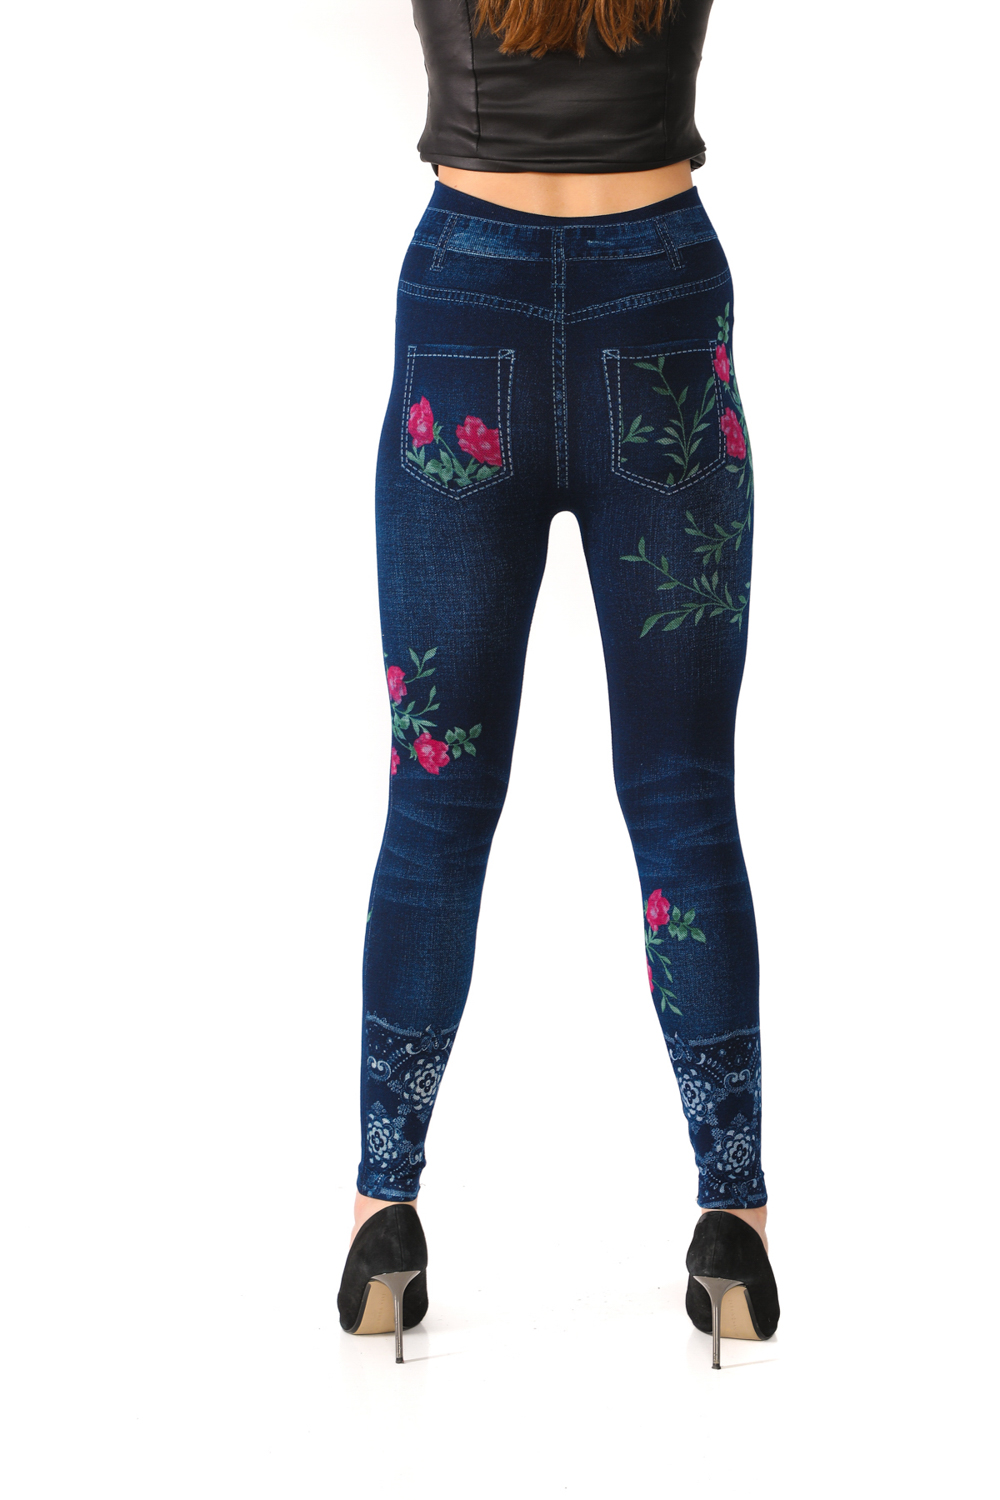 Denim Leggings with Red Floral Pattern